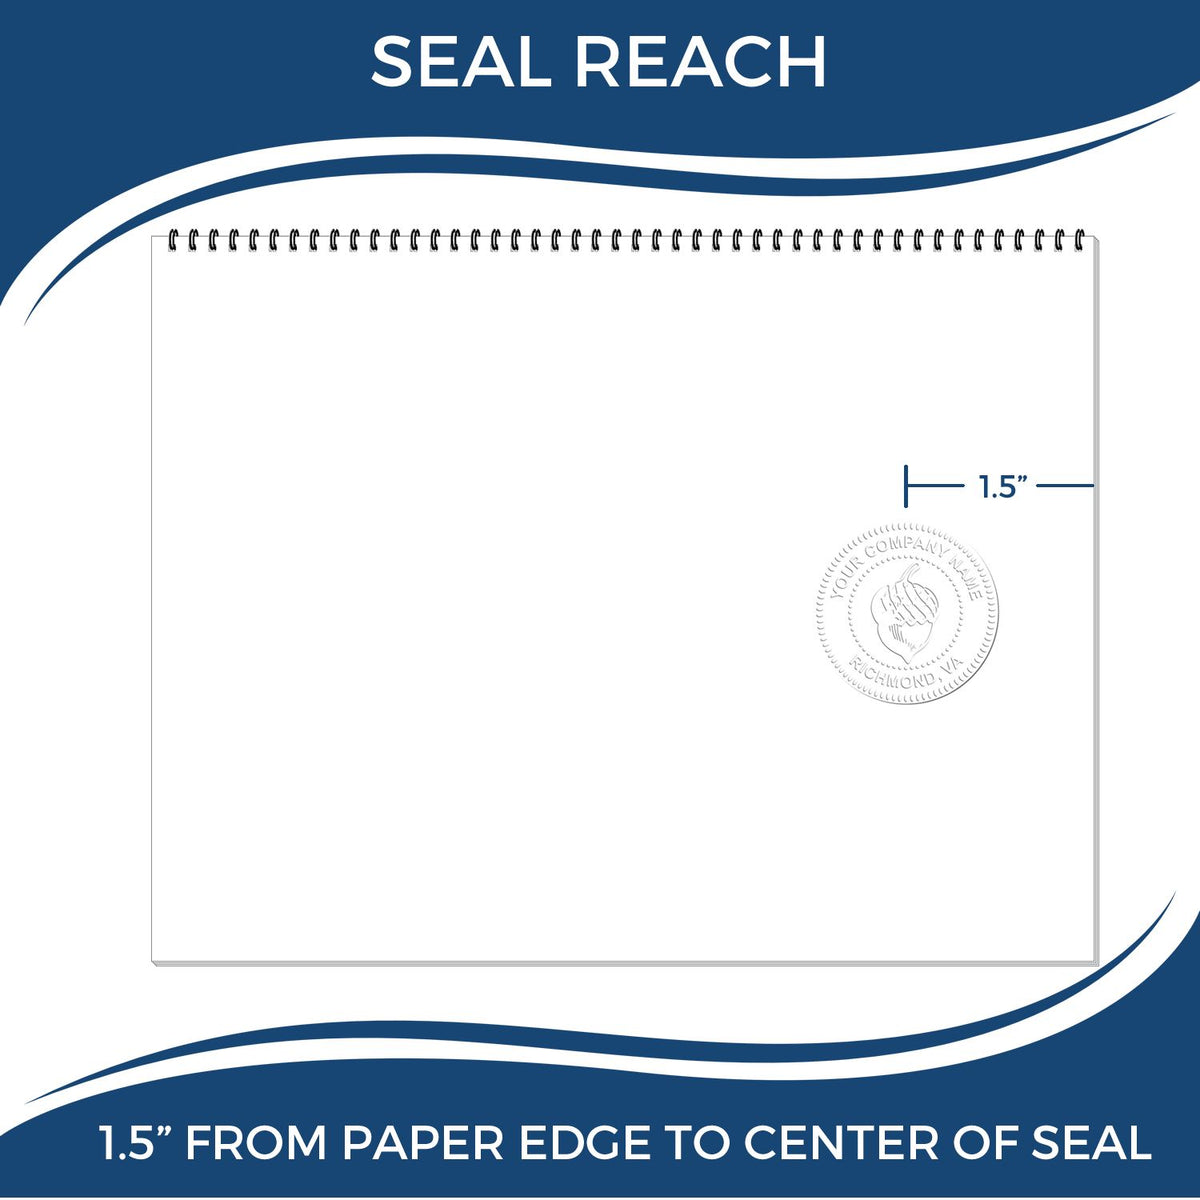 An infographic showing the seal reach which is represented by a ruler and a miniature seal image of the Hybrid North Carolina Geologist Seal